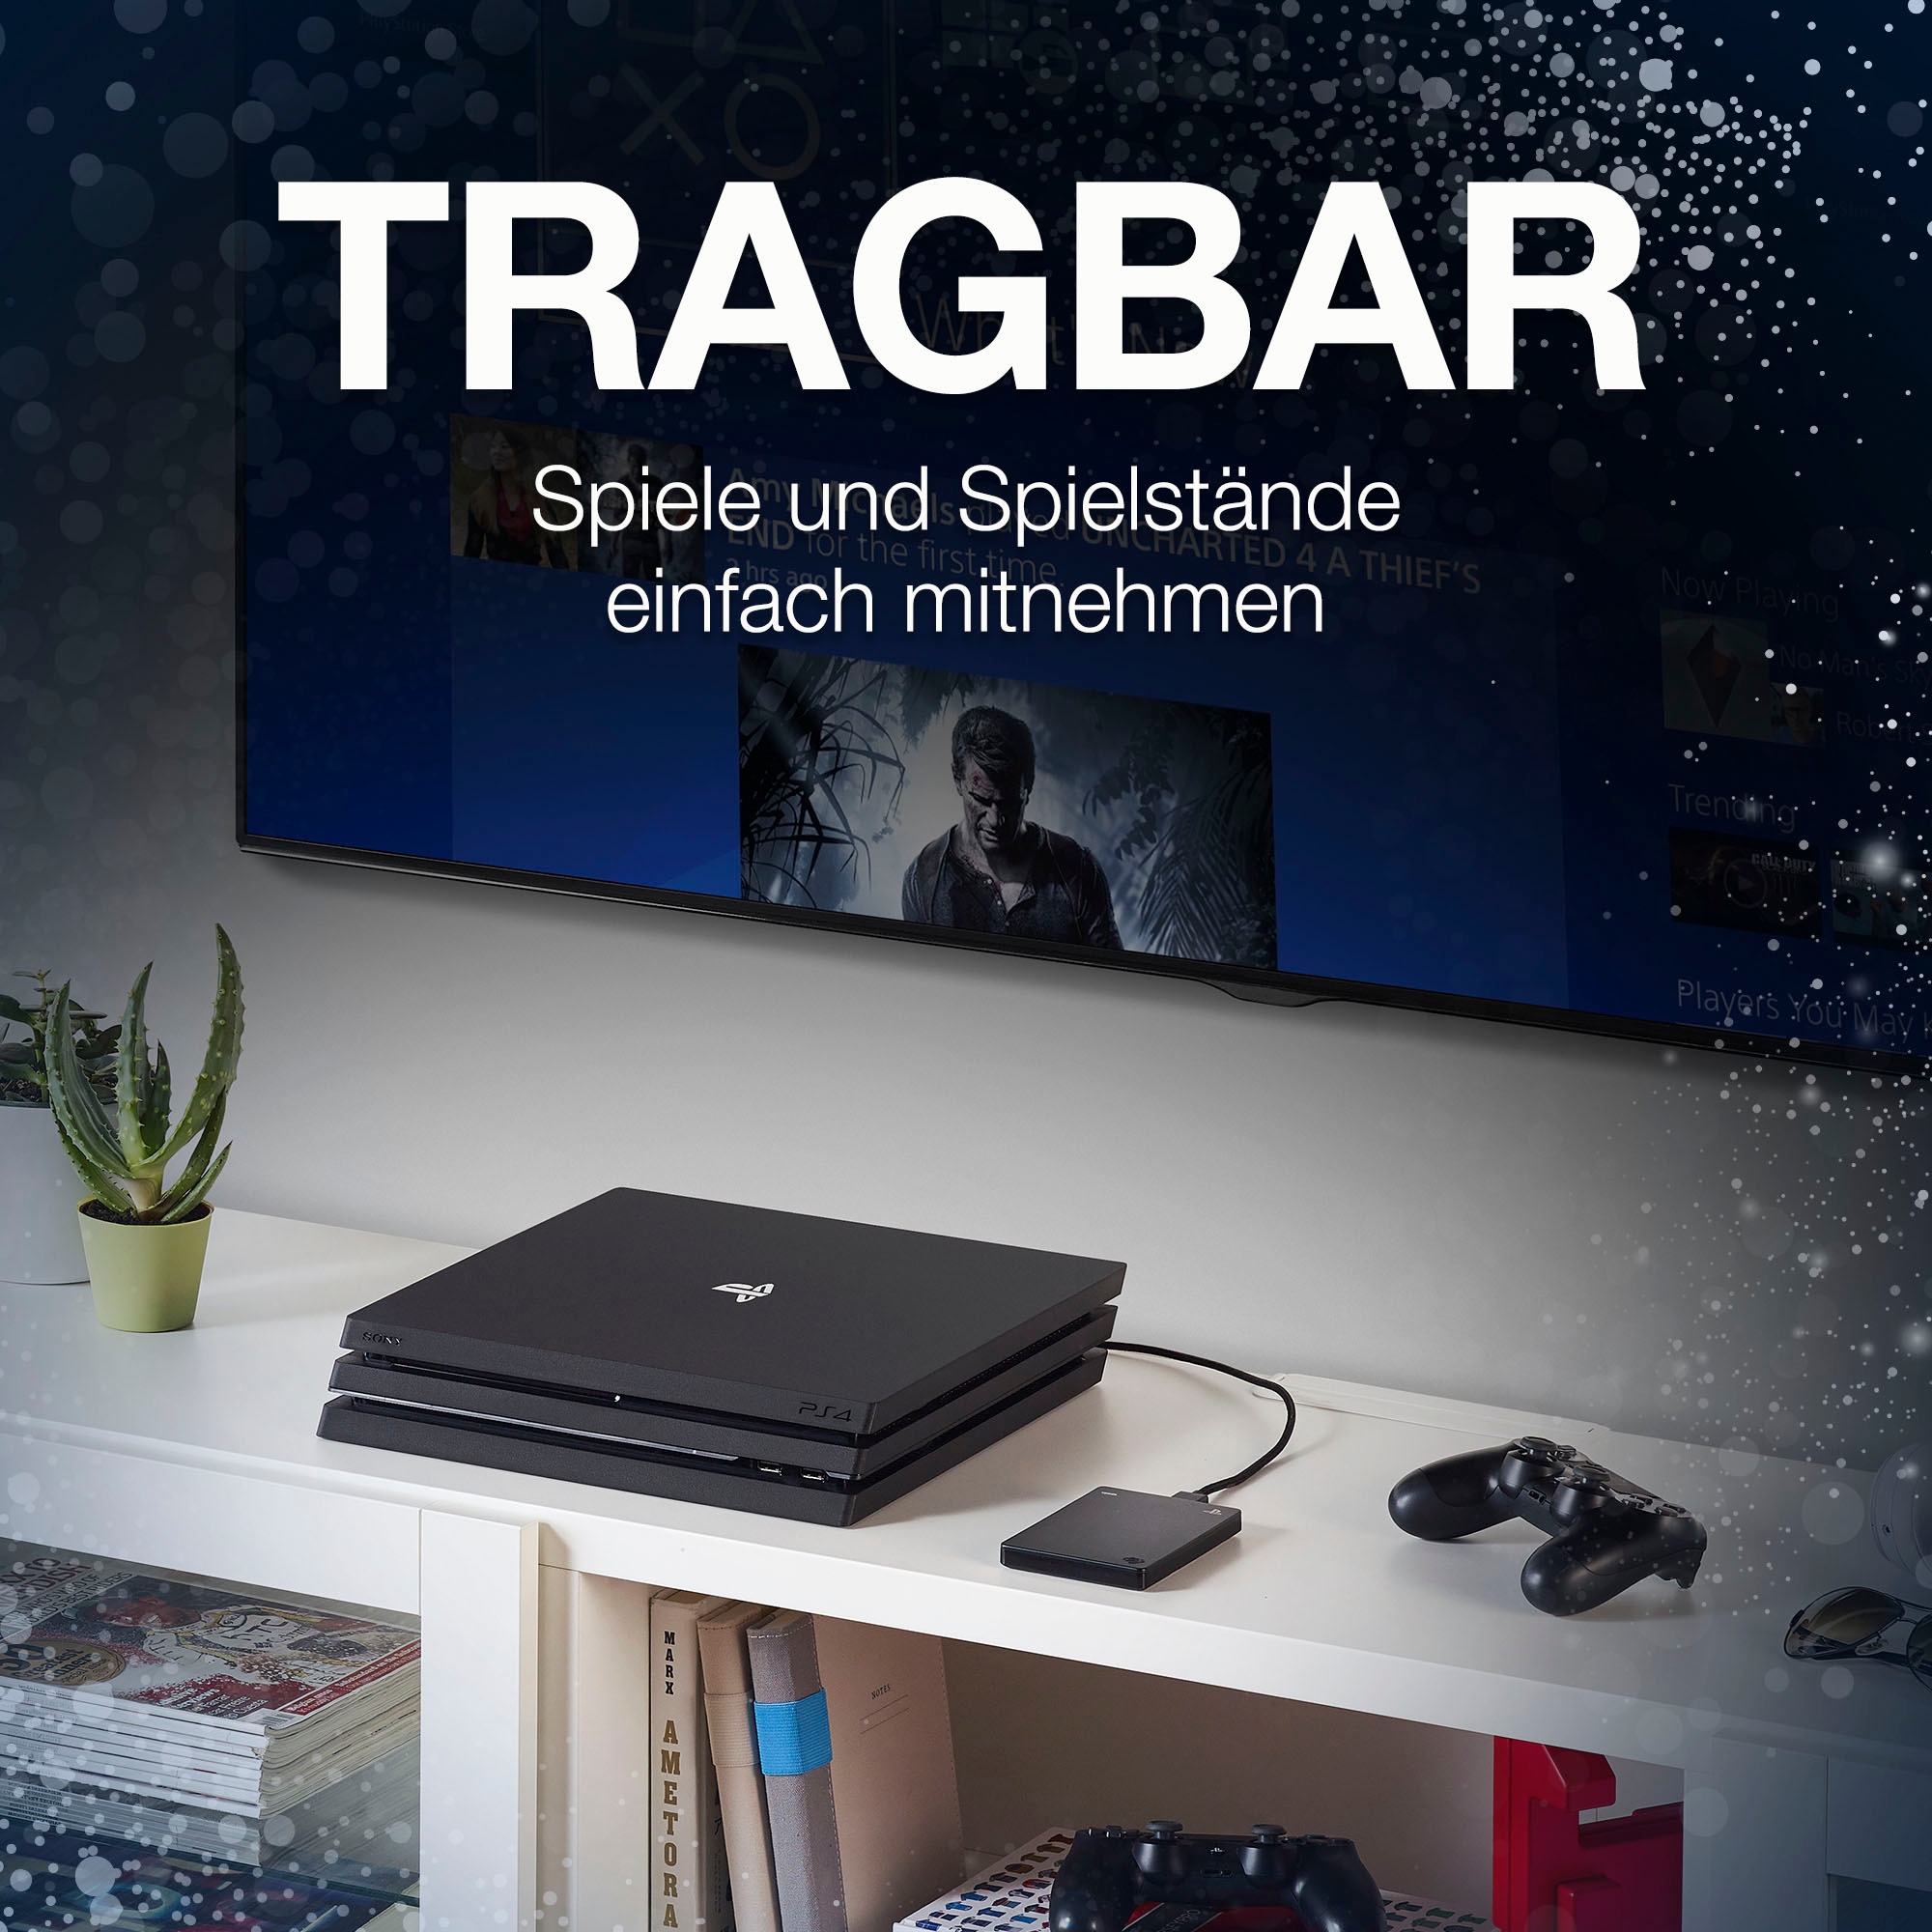 Seagate externe Gaming-Festplatte STGD2000200«, Zoll, 2,5 BAUR Anschluss Drive 3.2 PS4 | USB »Game